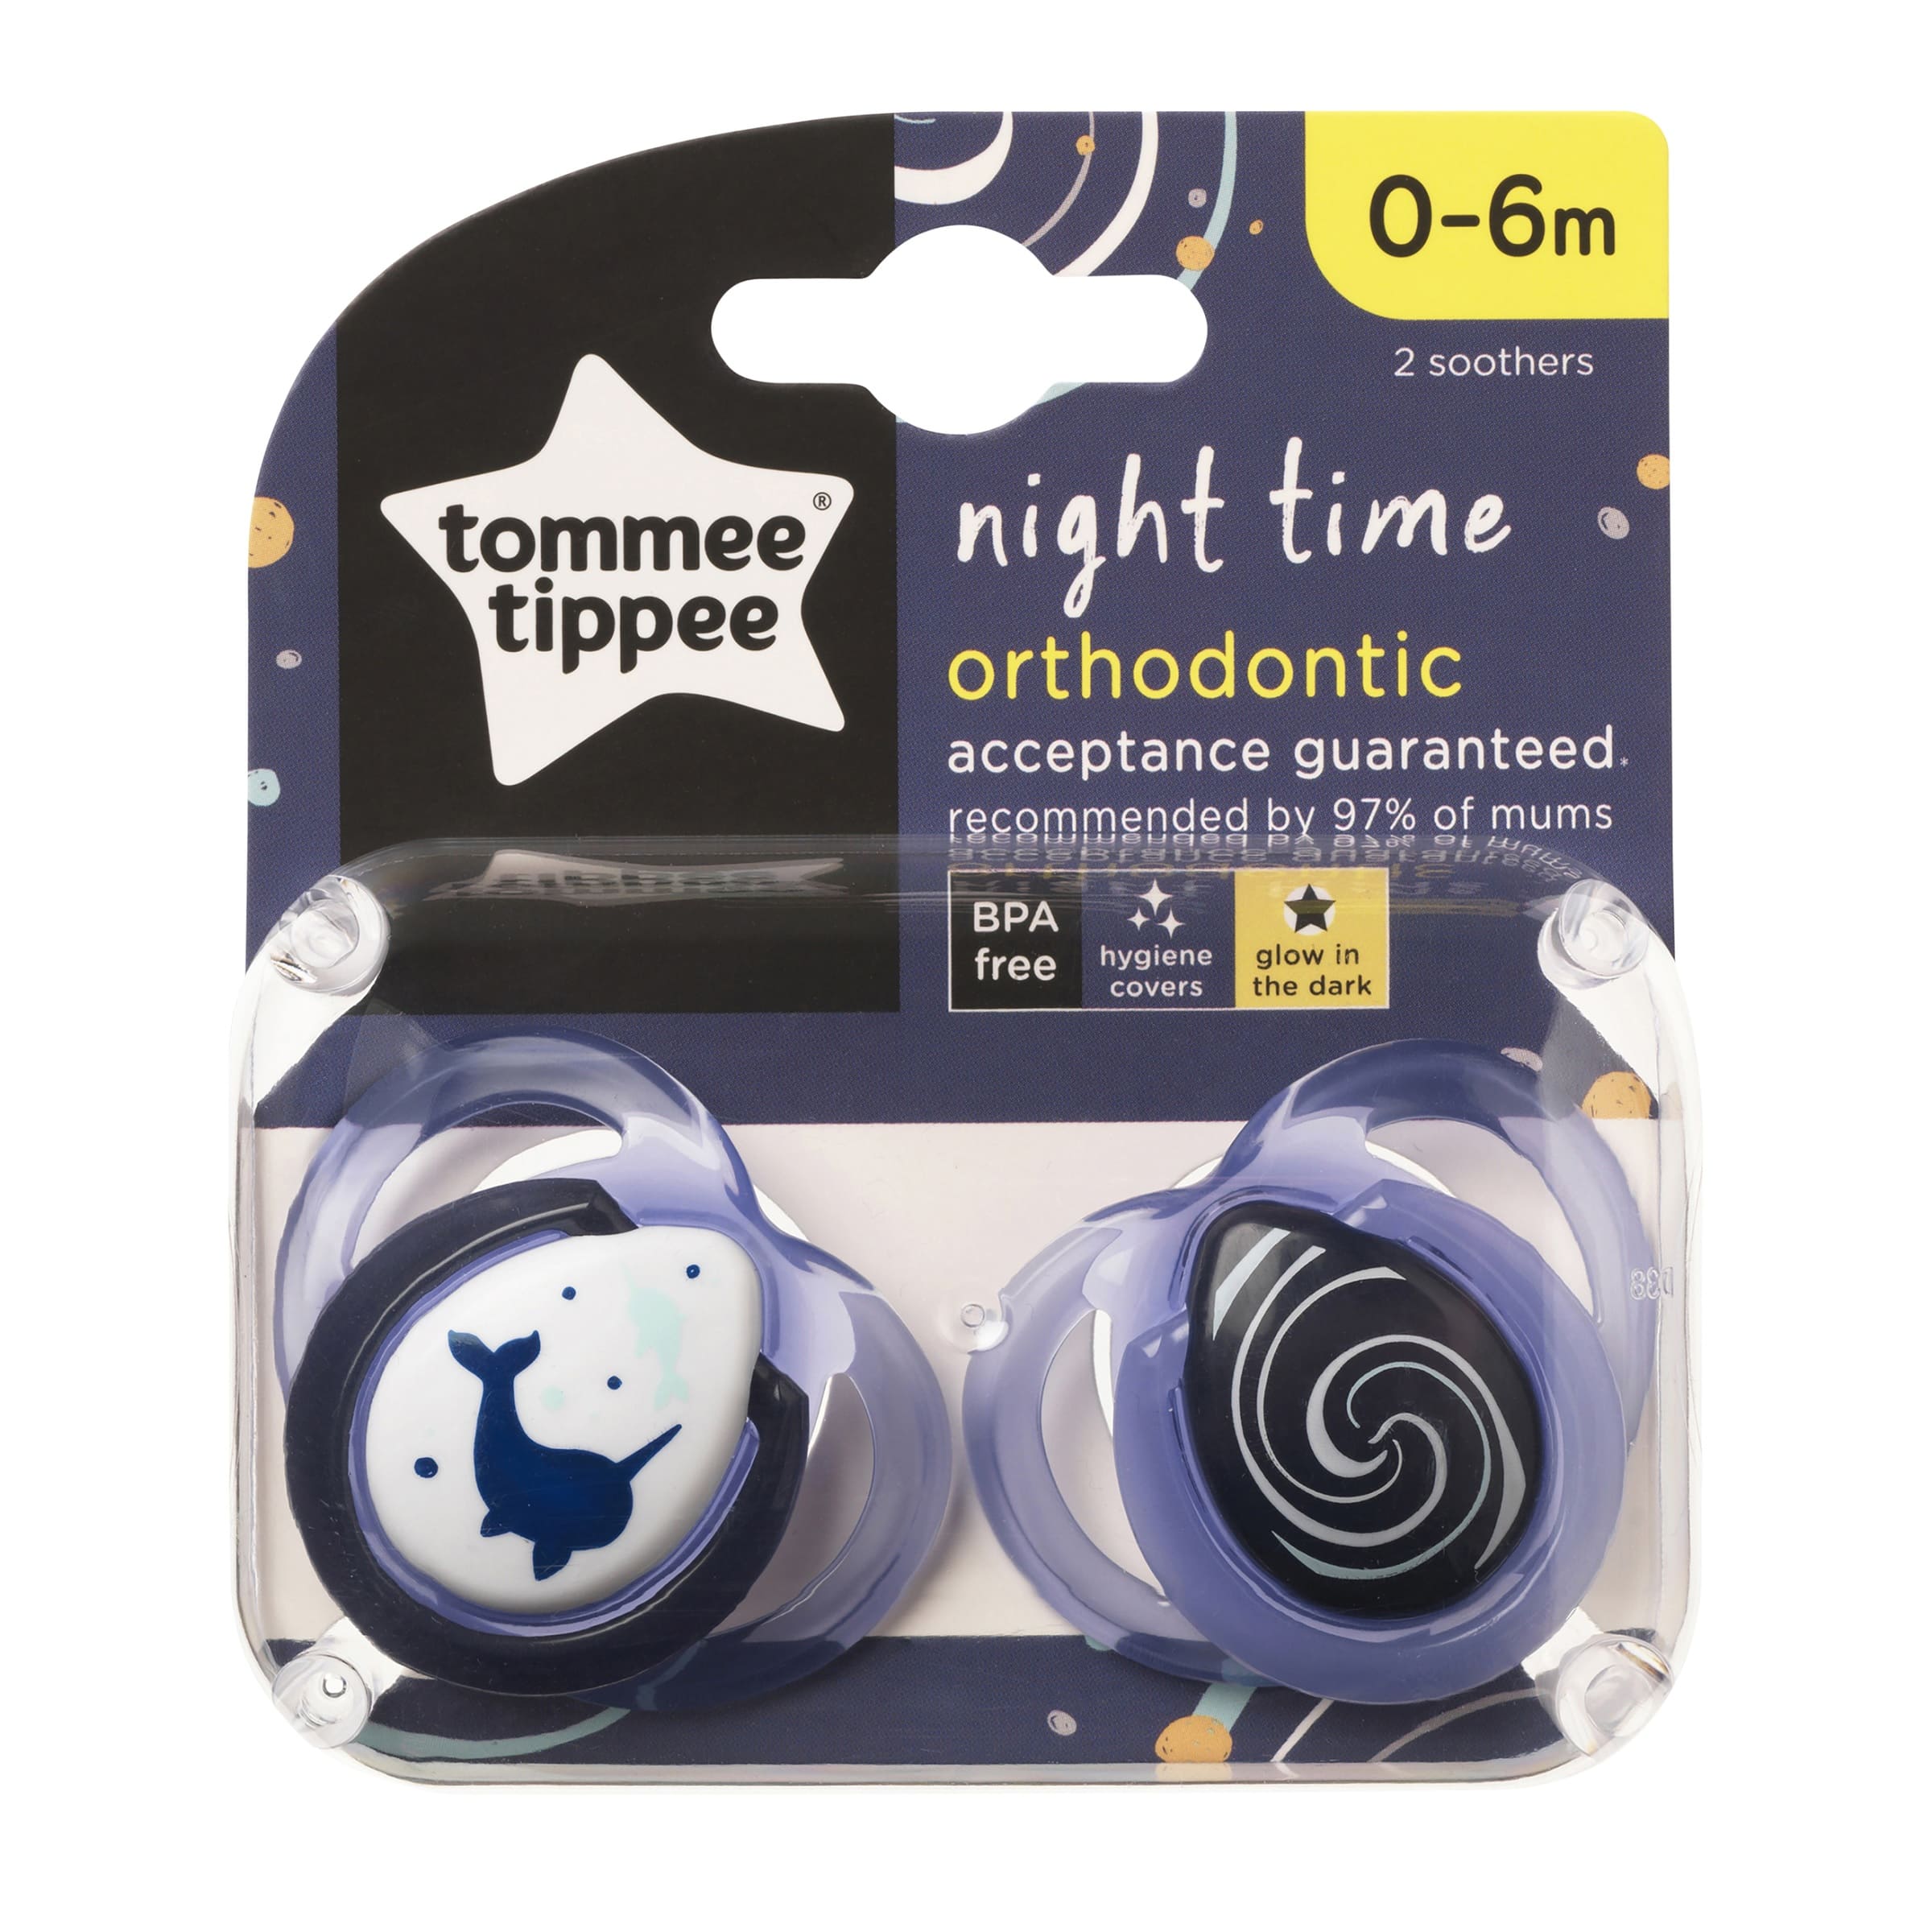 Tommee Tippee Night Time Orthodontic Soother with Hygiene (Glow in the Dark) - 2pk